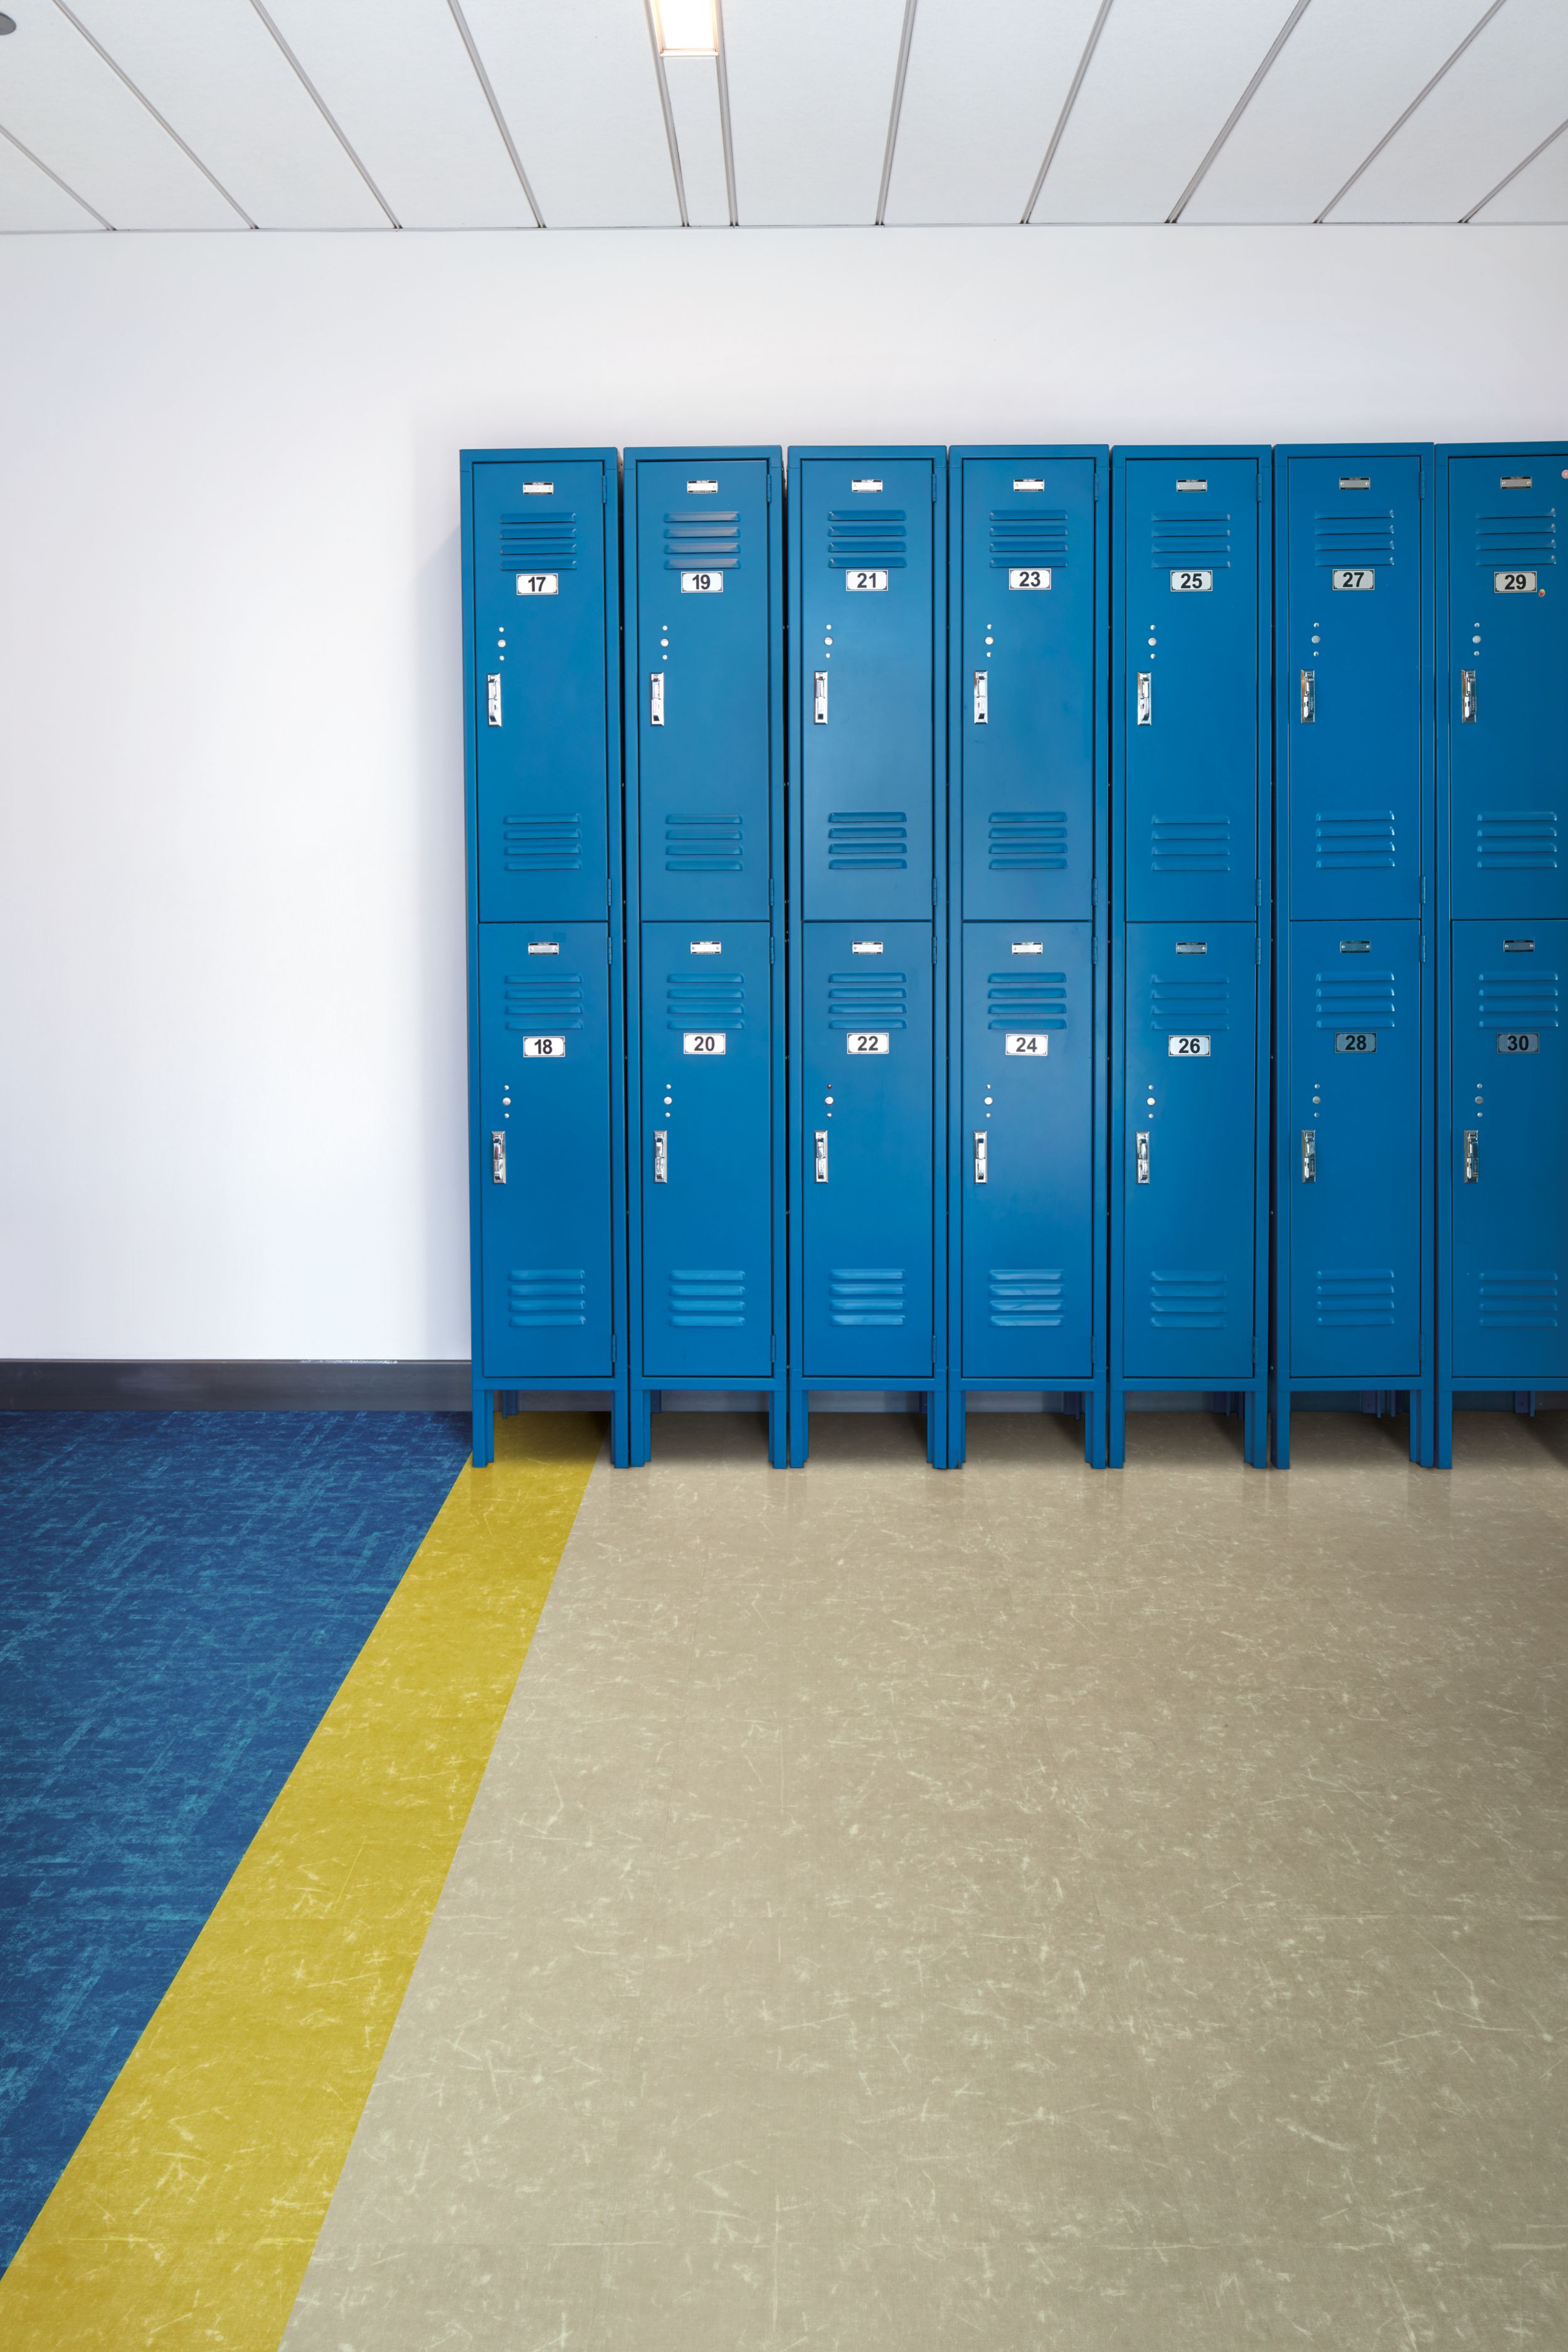 Interface Scorpio and Aries LVT in school hallway with lockers numéro d’image 1